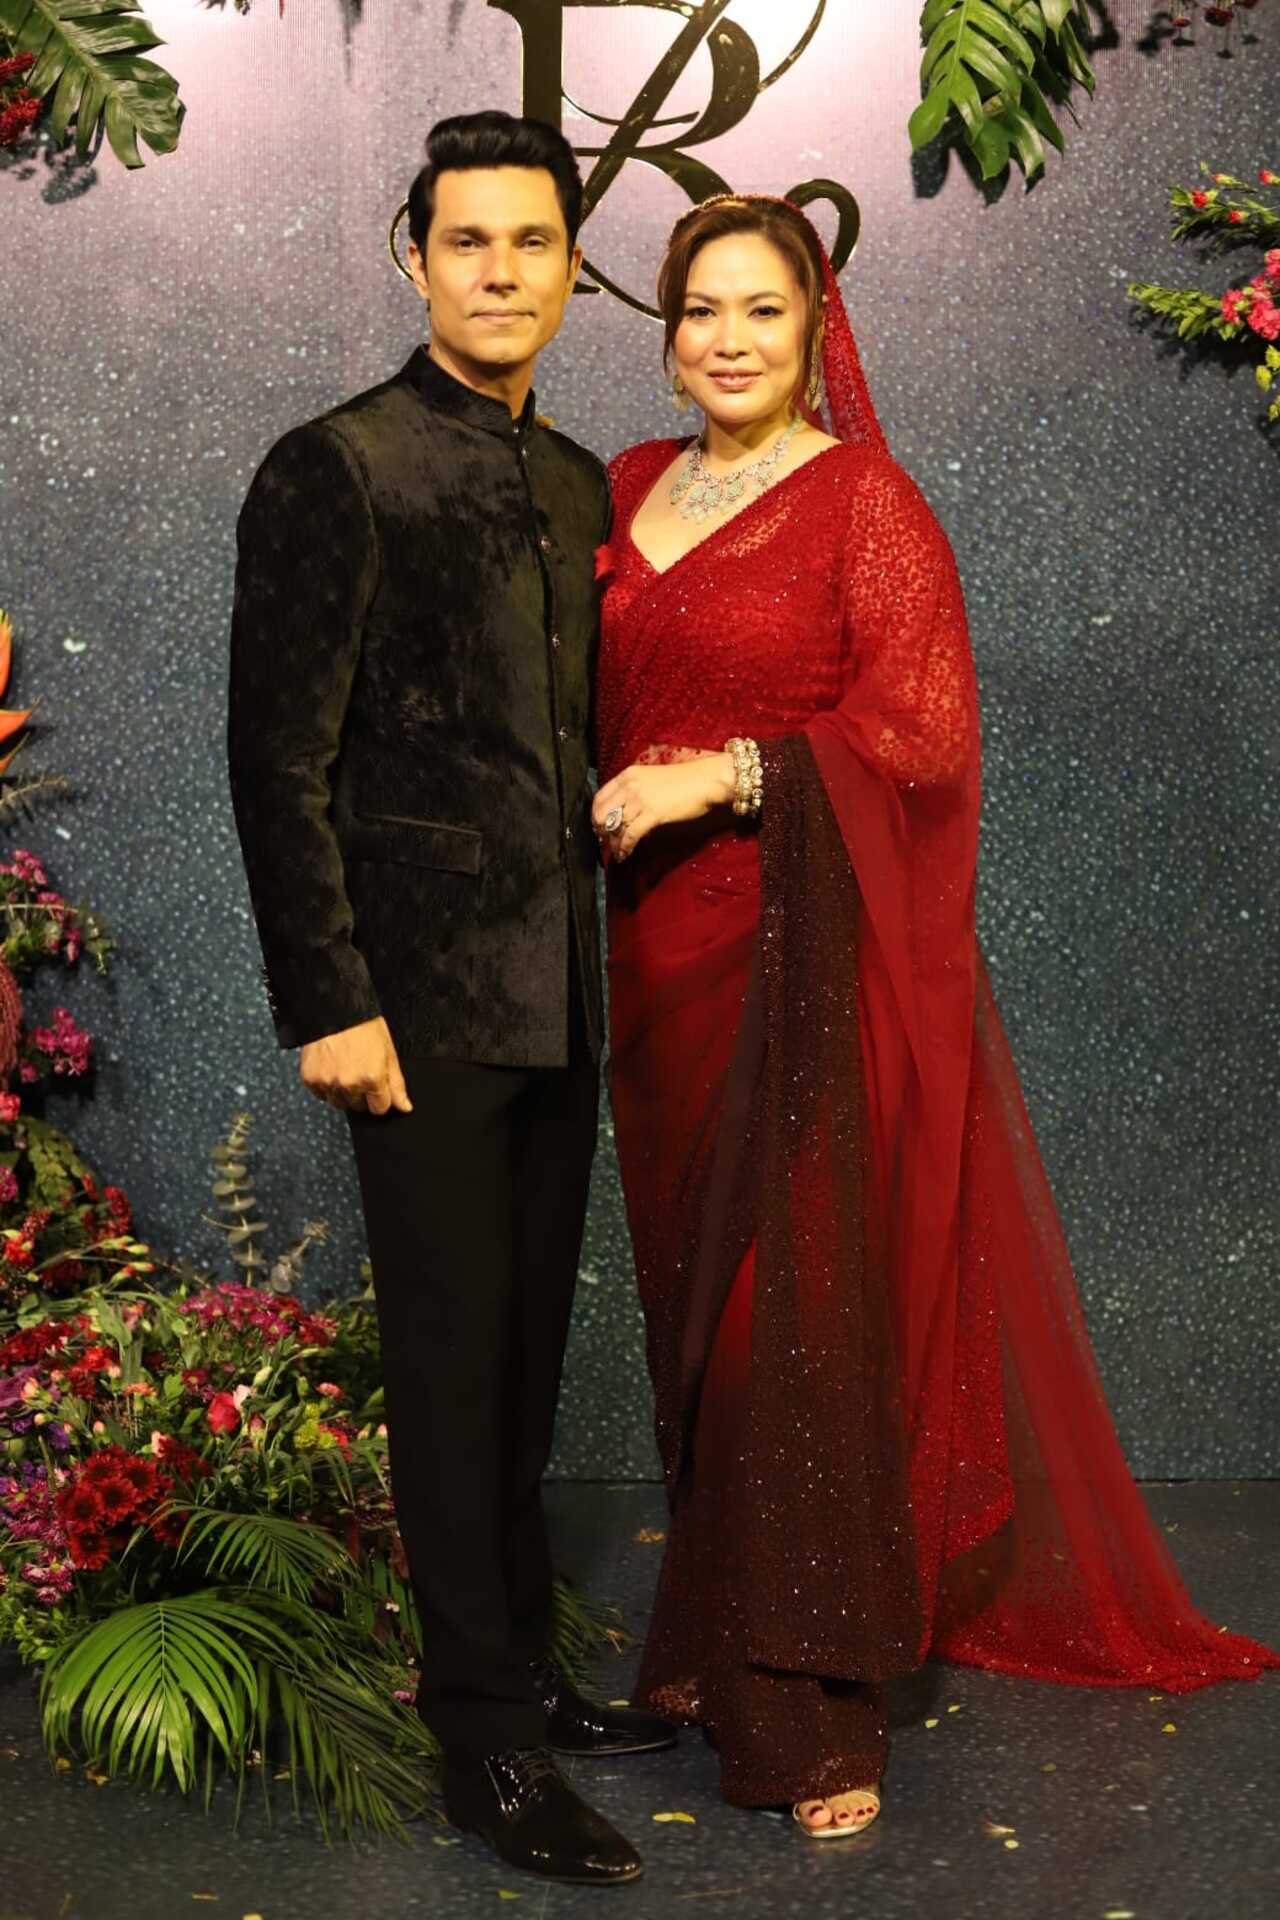 For the reception, new bride Lin Laishram wore a stunning red and brown gradient saree. She completed her look with stunning diamond jewellery. Meanwhile, Randeep Hooda complimented his wife in a black tuxedo. (Pic/Yogen Shah)